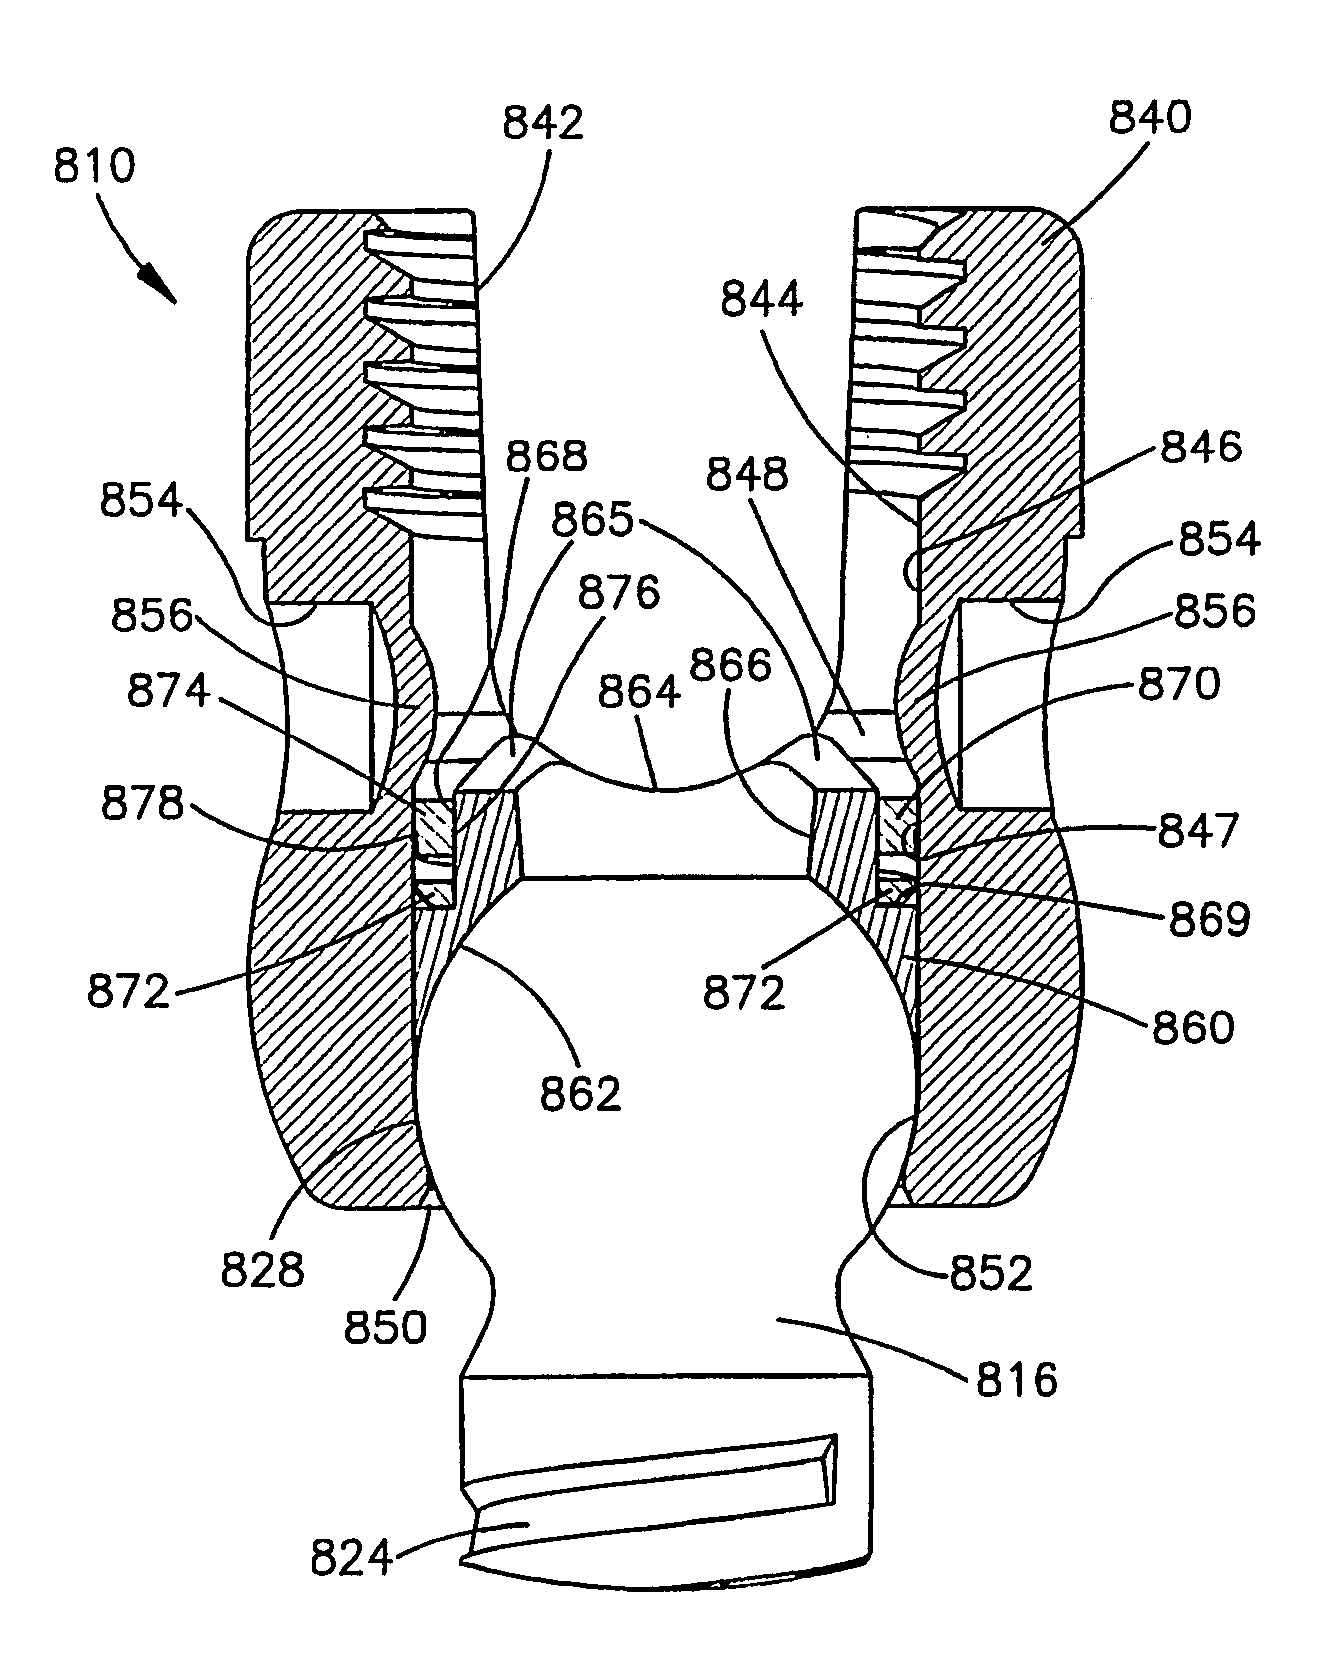 Apparatus for connecting a longitudinal member to a bone portion